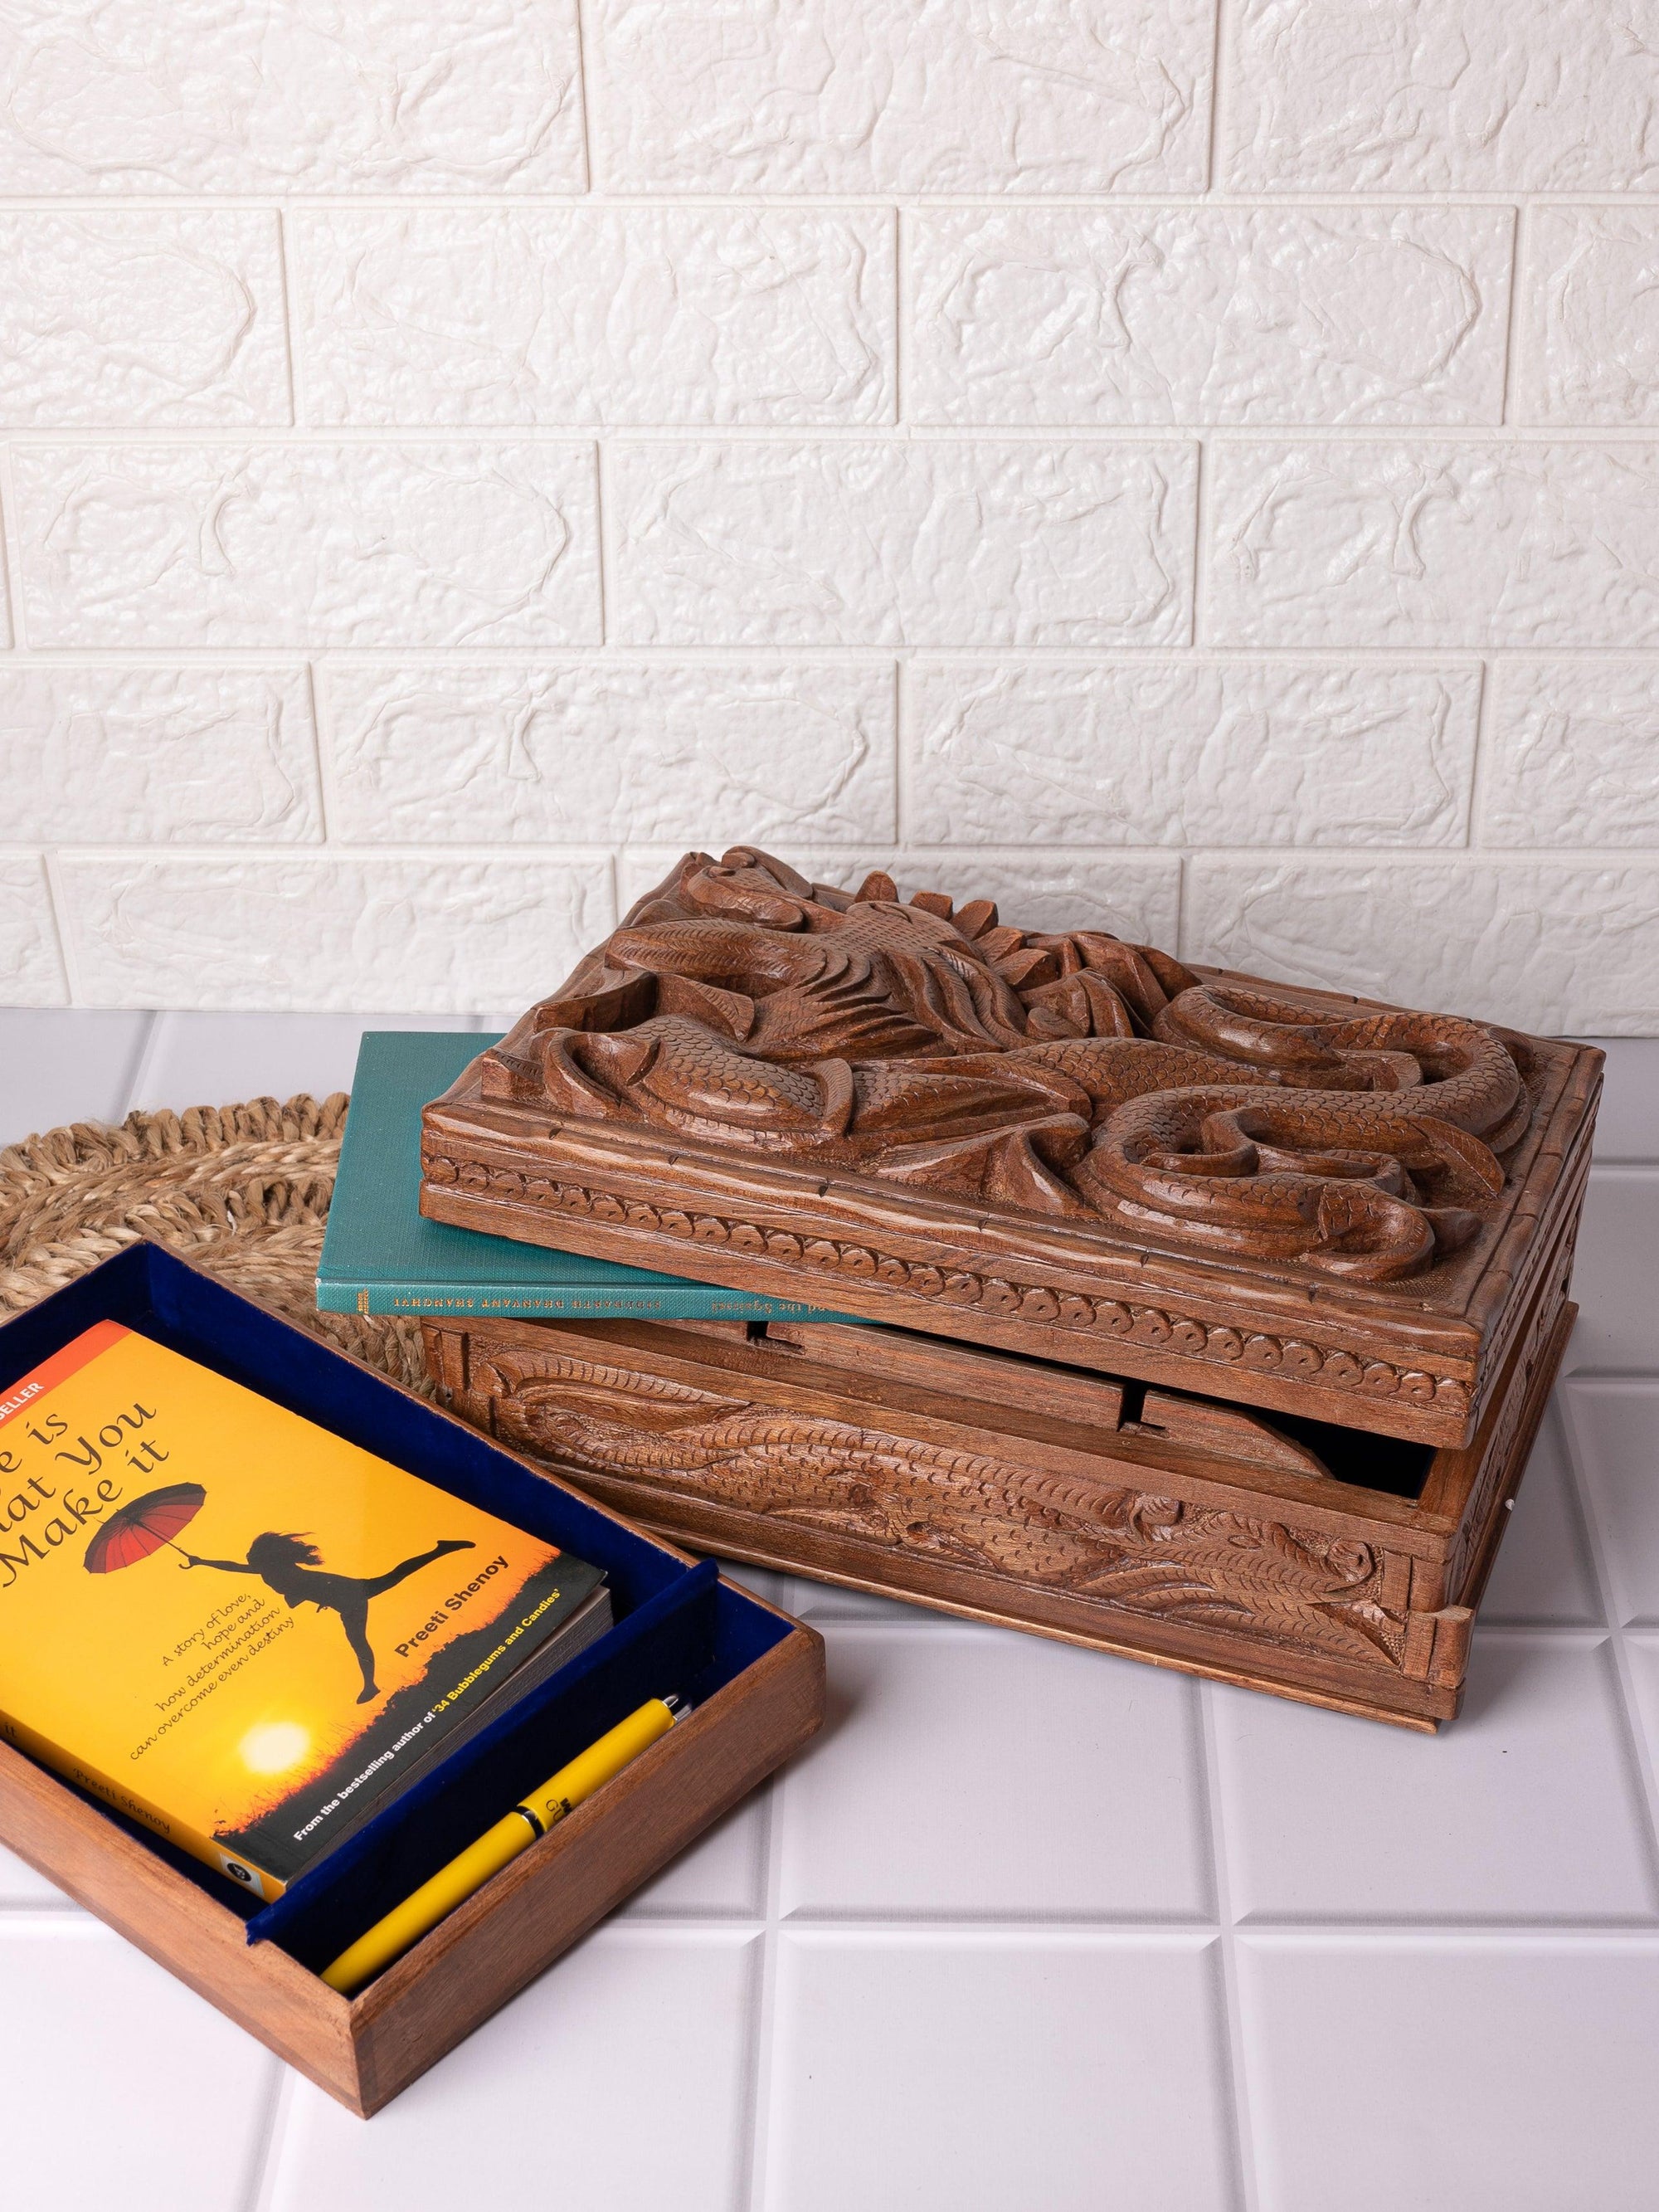 Walnut wood carved Dragon design Storage box, Big size - 8x12 inches - The Heritage Artifacts